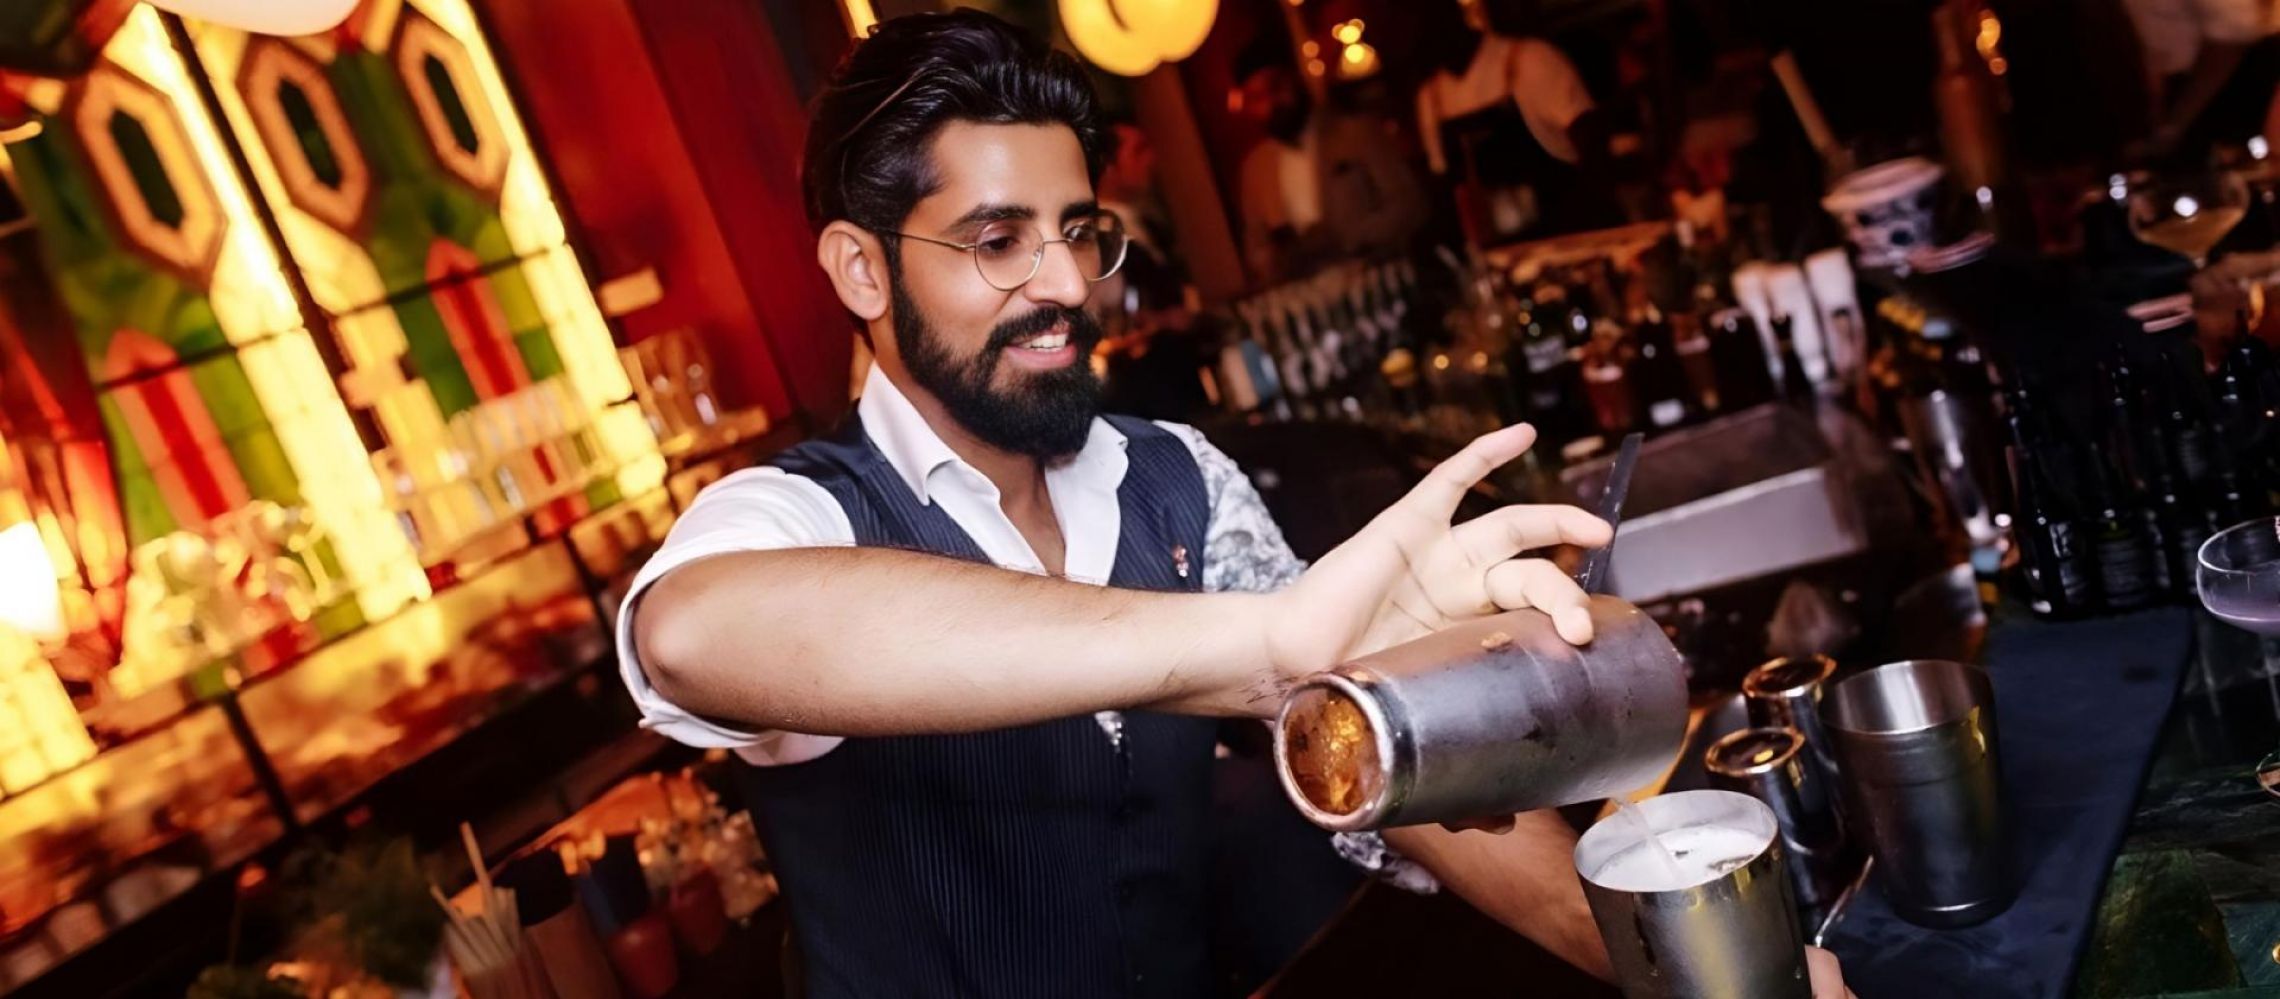 Photo for: Jeet Verma, Award Winning Bartender From Asia On The Most Important Skills Bartenders Should Have